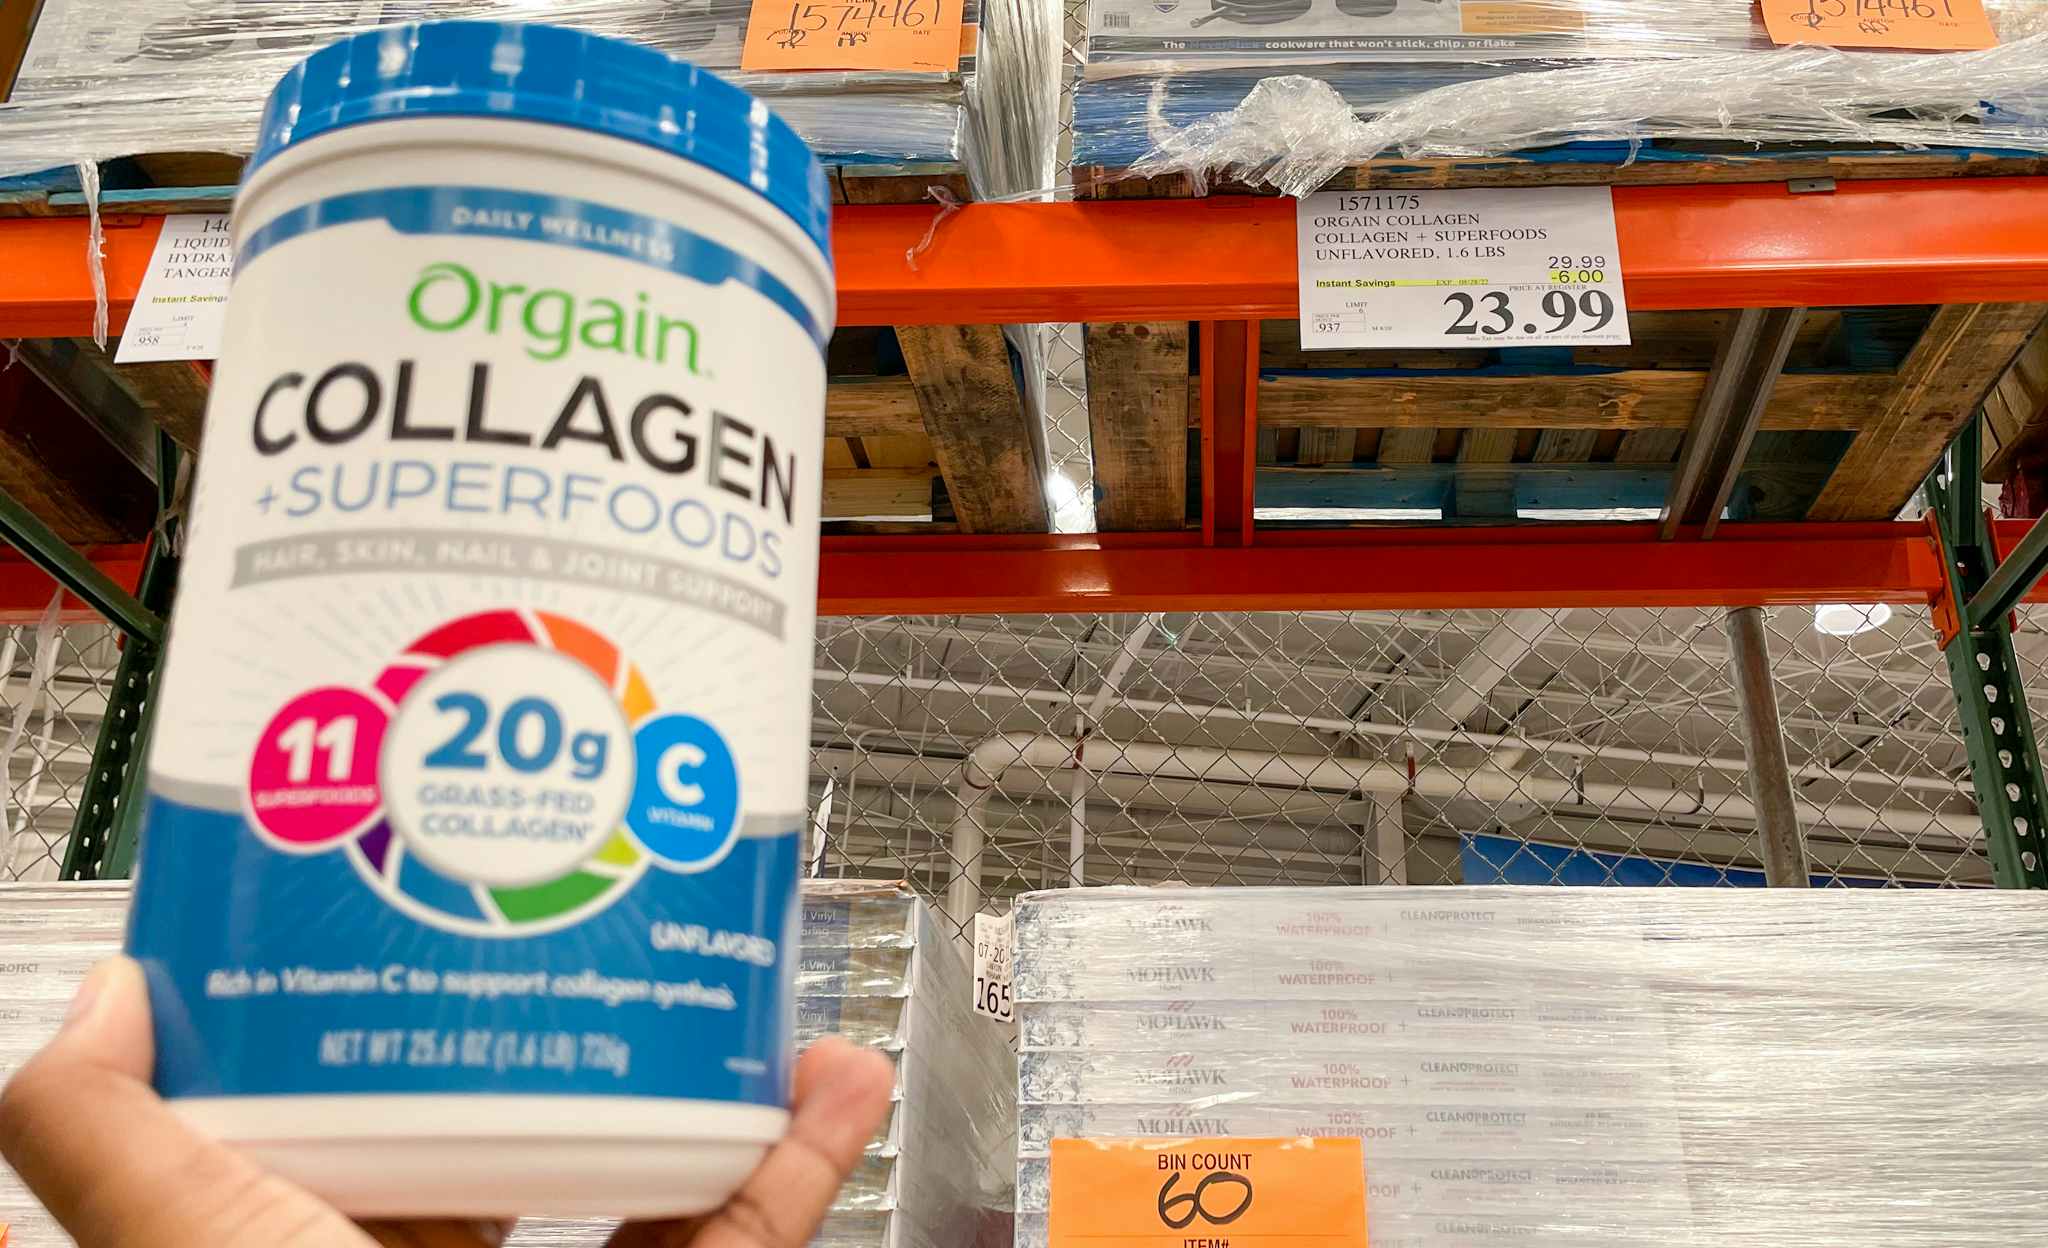 orgain collagen superfoods hand held near sale sign at costco